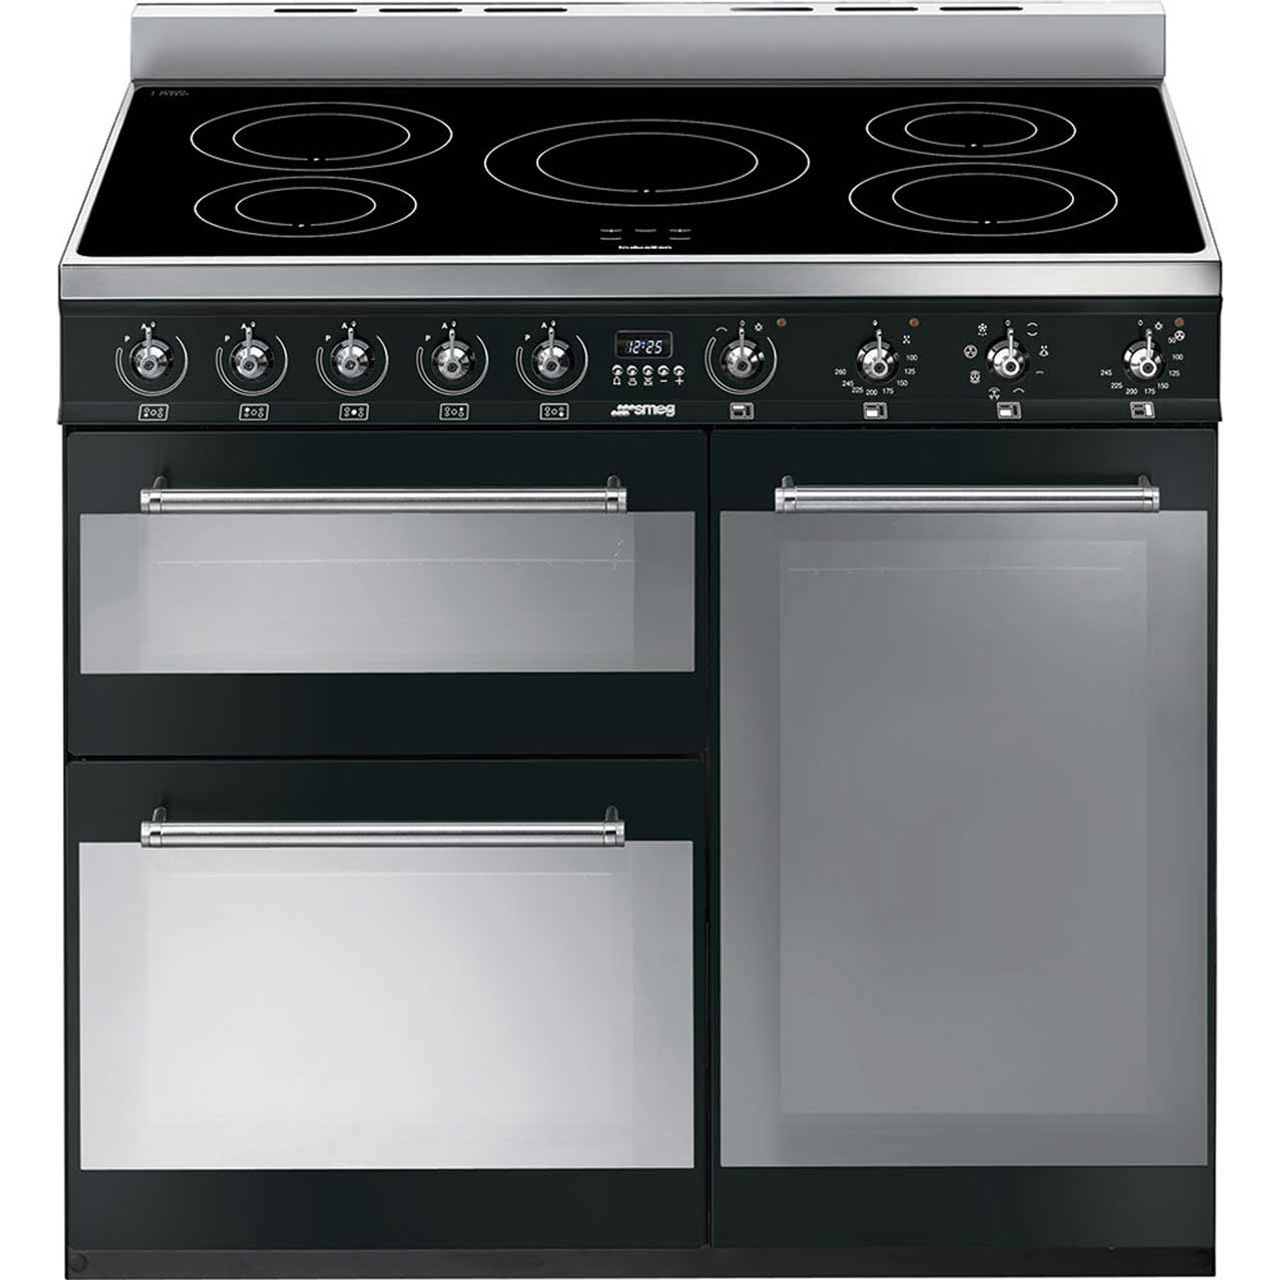 Smeg Symphony SY93iBL 90cm Electric Range Cooker with Induction Hob Review